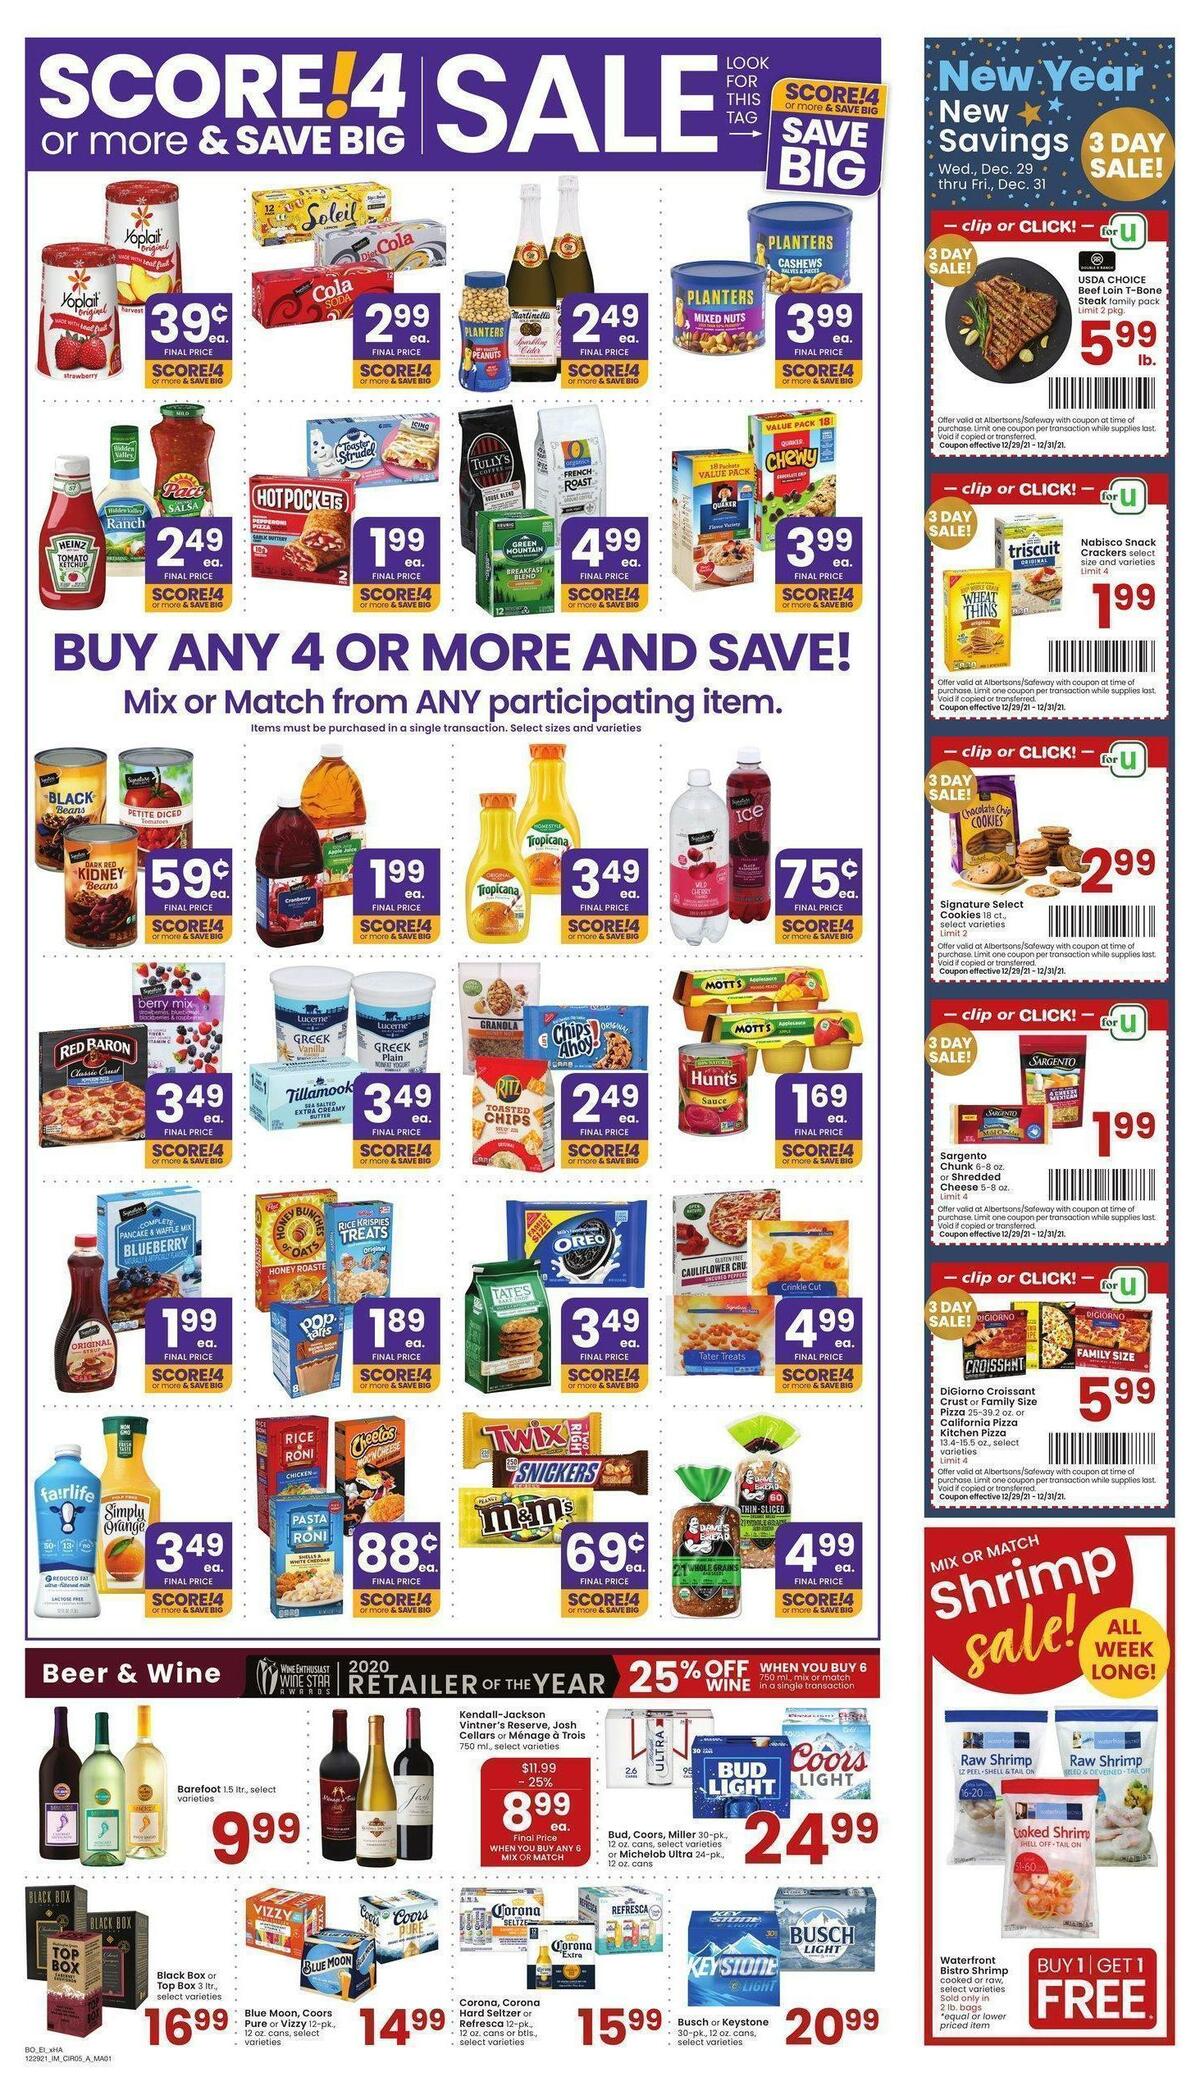 Albertsons Weekly Ad from December 29